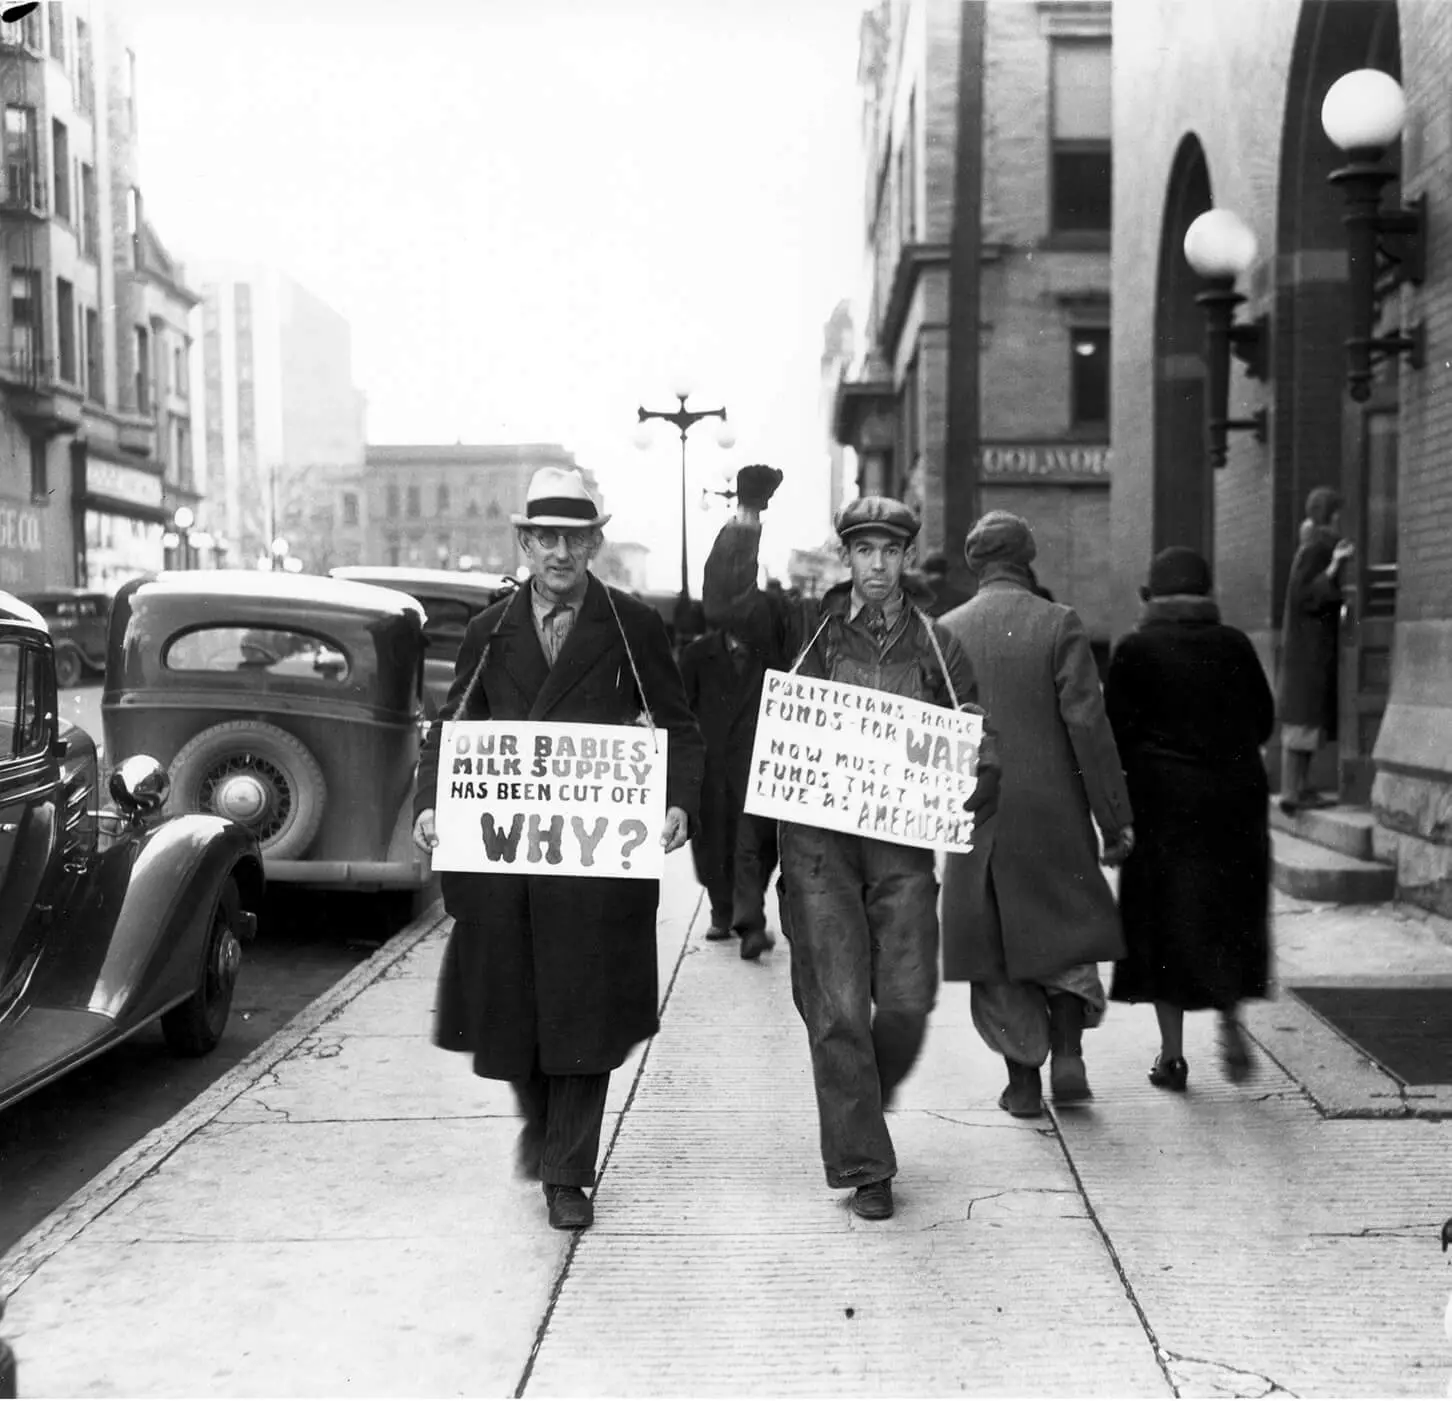 Two white men walk on a sidewalk in Downtown Bloomington with picket signs hanging around their necks. The man on the right is wearing overalls and has his gloved fist raised. Their signs say